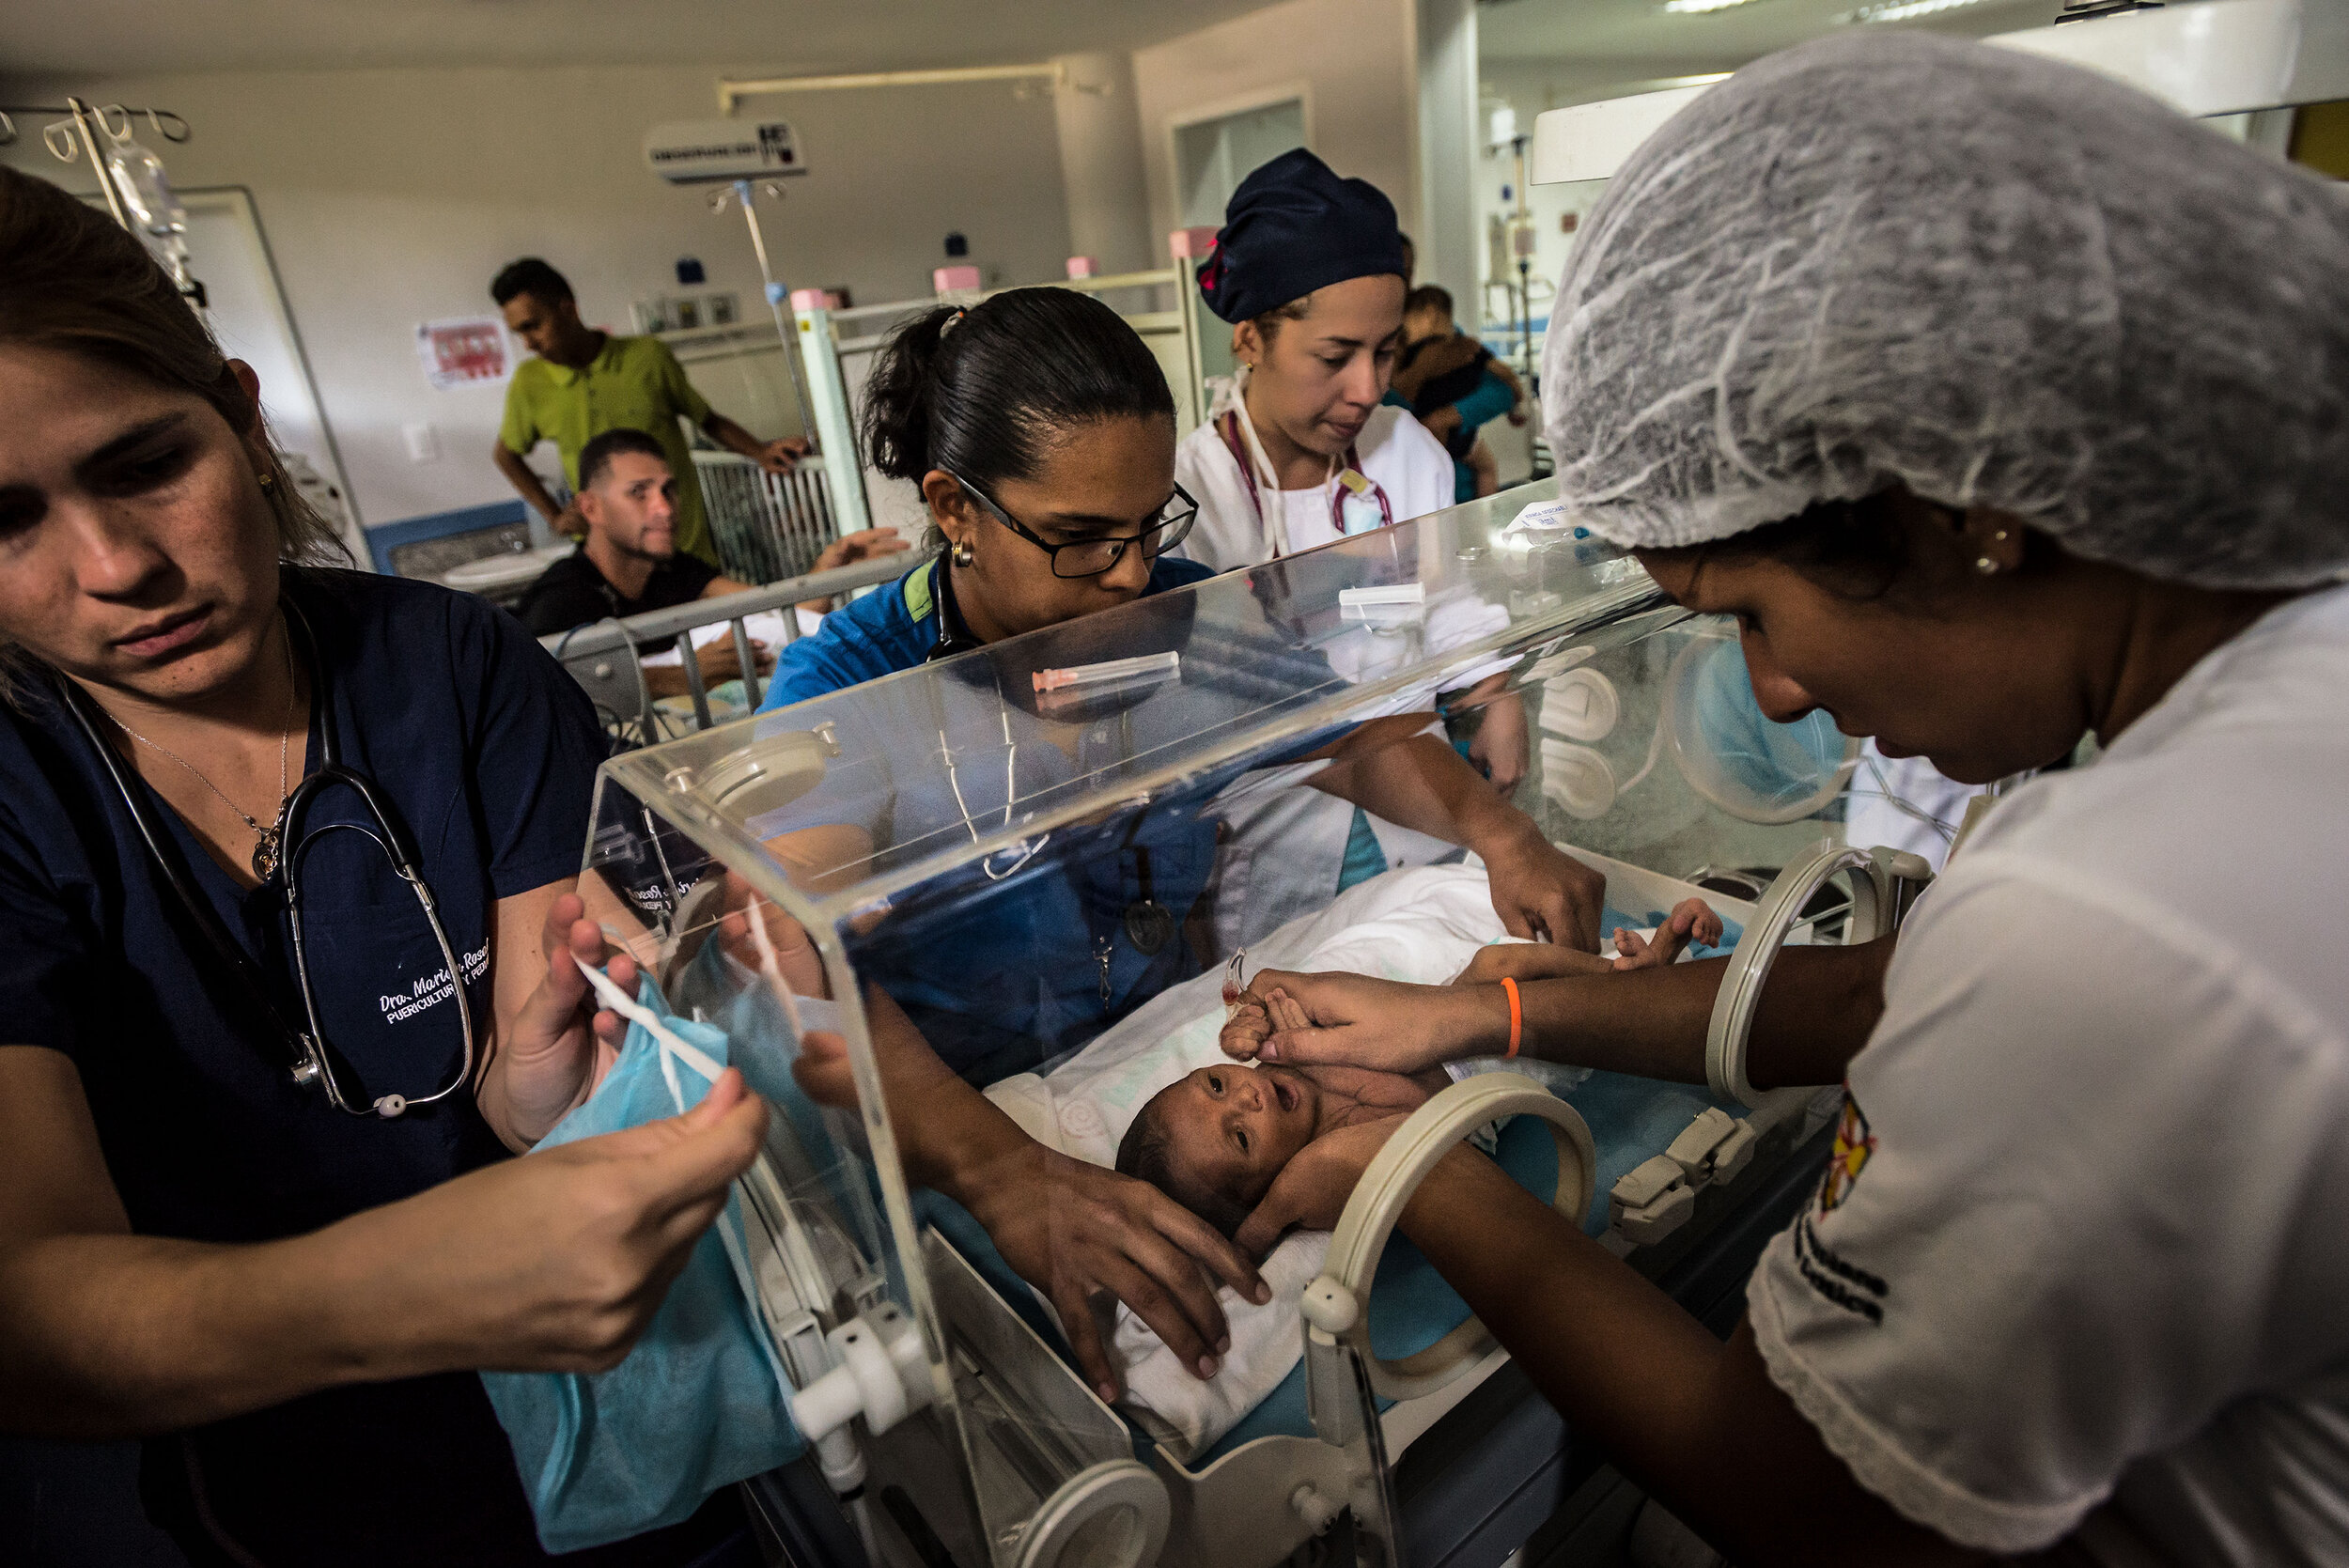  In August 2017, 18-day-old Esteban Granadillo, who weighs only 4 pounds, 10 ounces, is taken to the emergency room with severe malnutrition in Barquisimeto, Venezuela.  © Meridith Kohut  